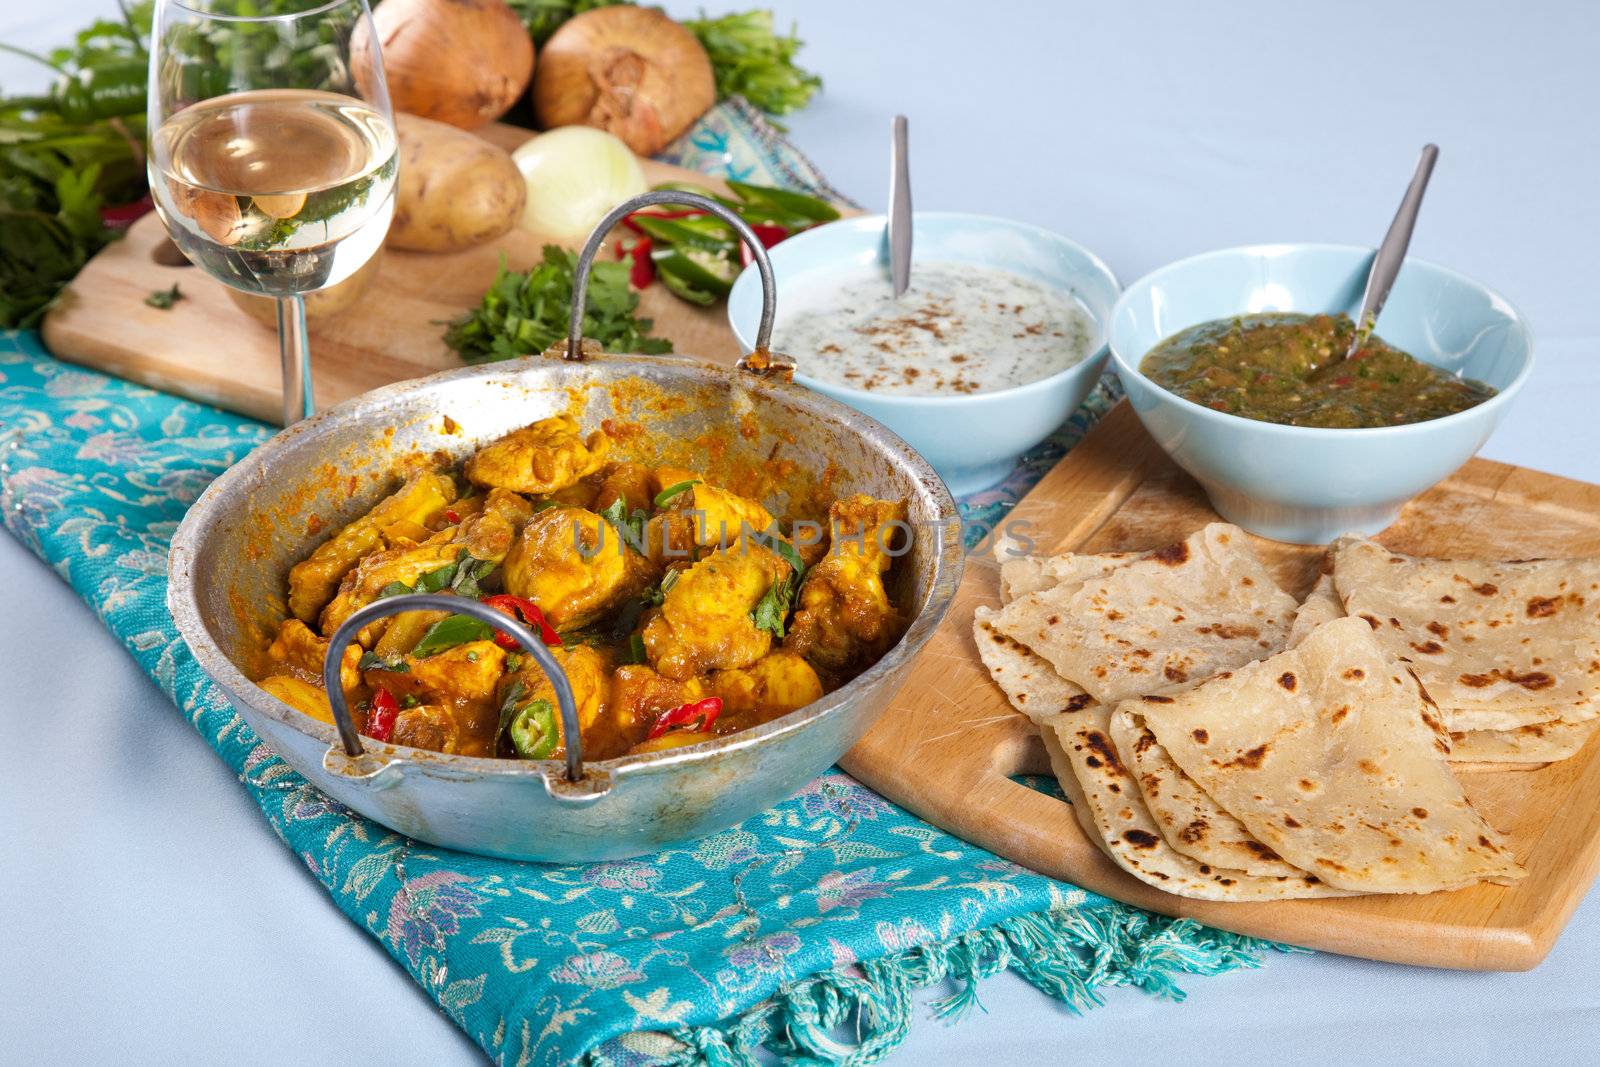 Table with typical Indian dishes such as Indian curry, roti and dips